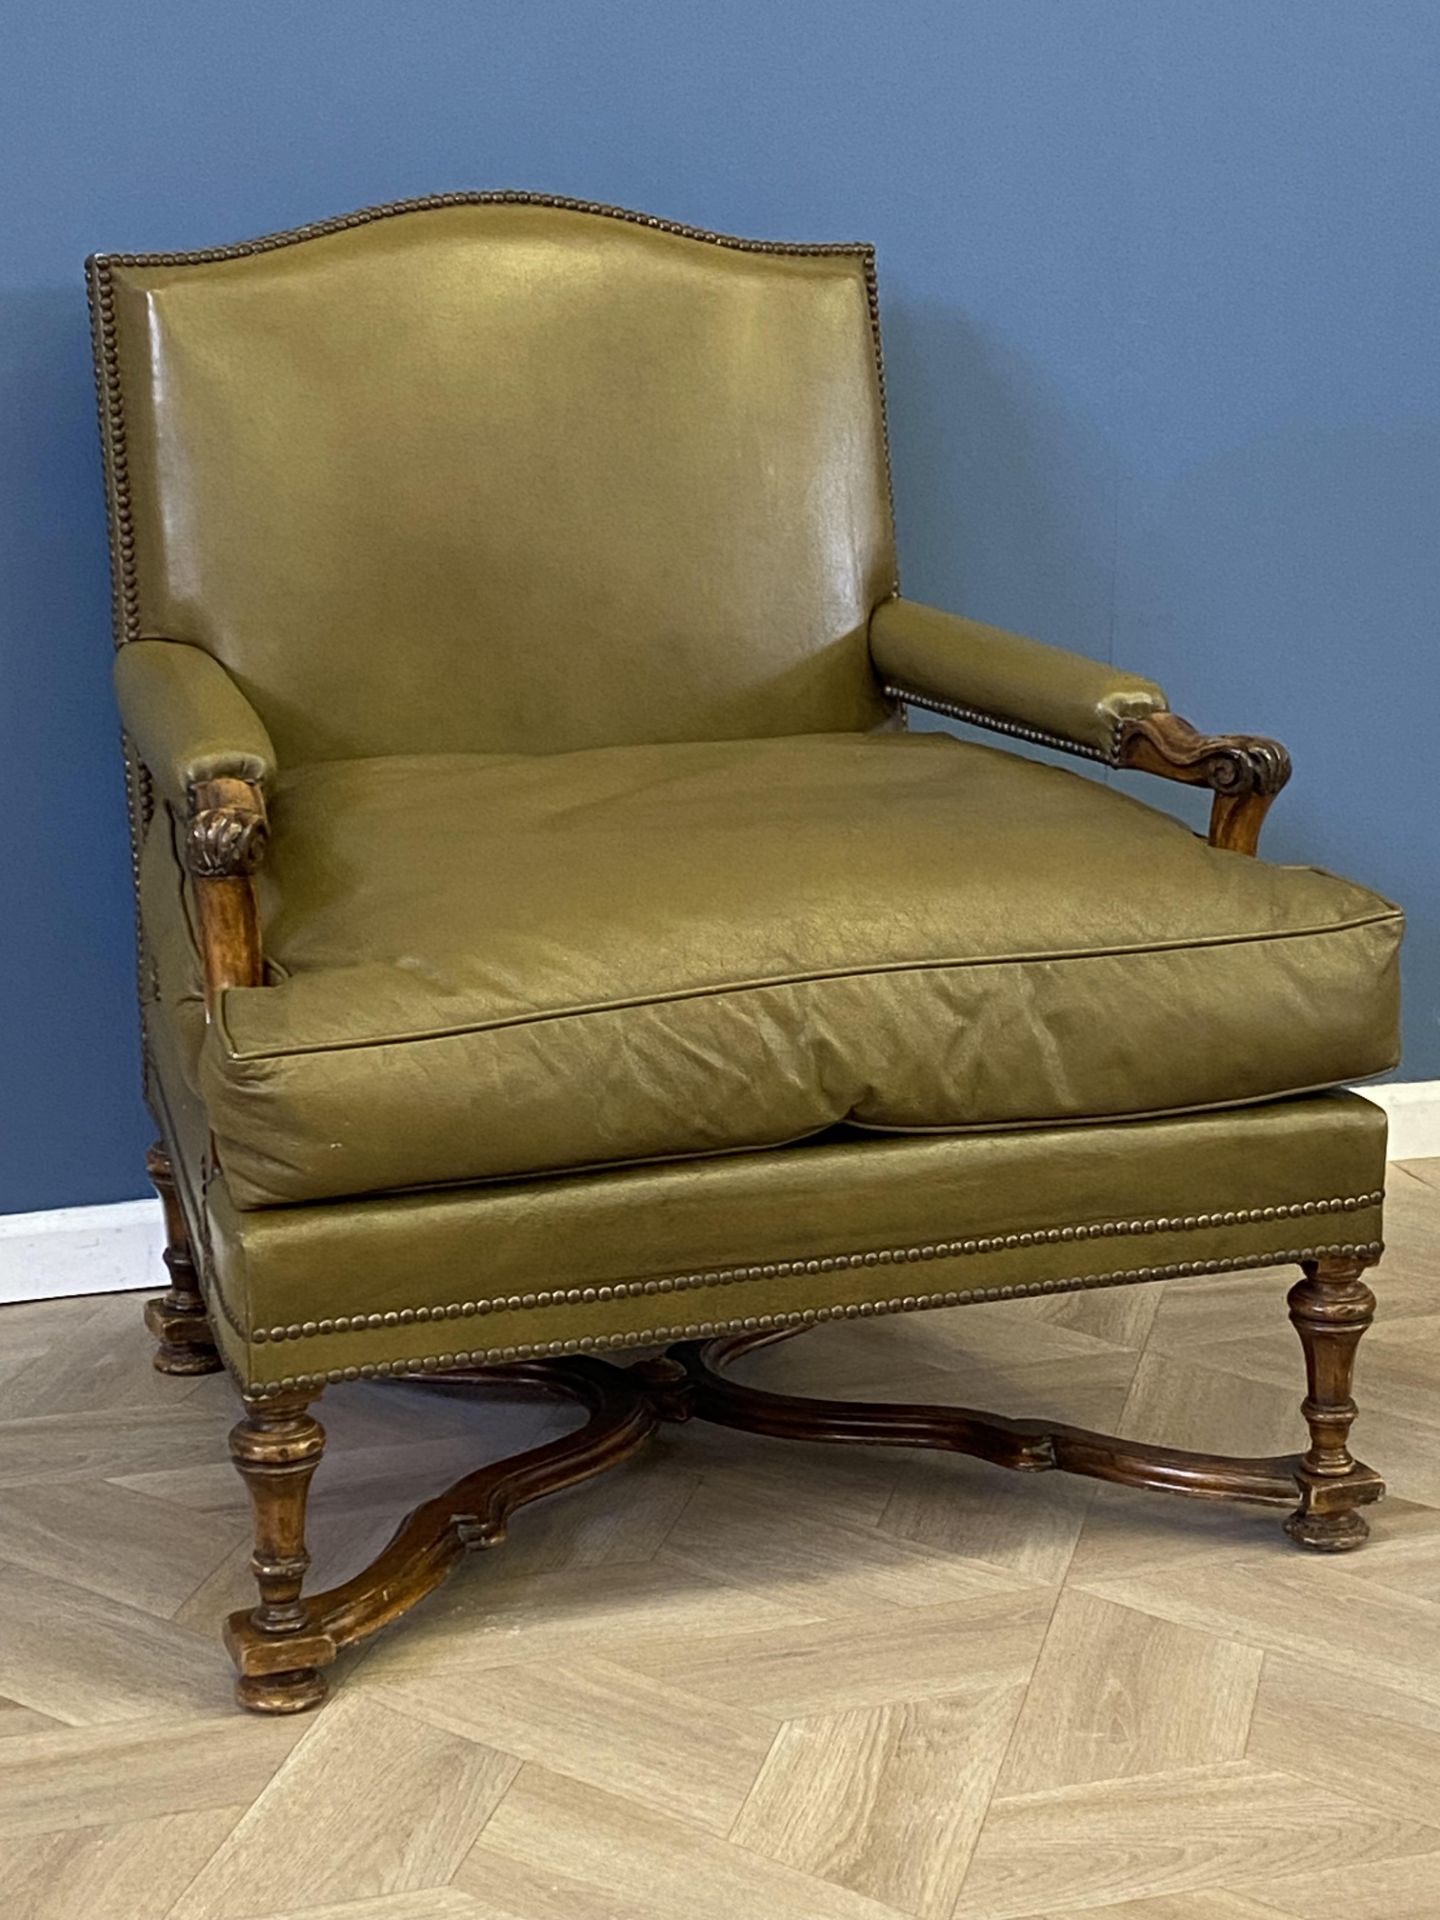 Pair of green leather armchairs - Image 11 of 12